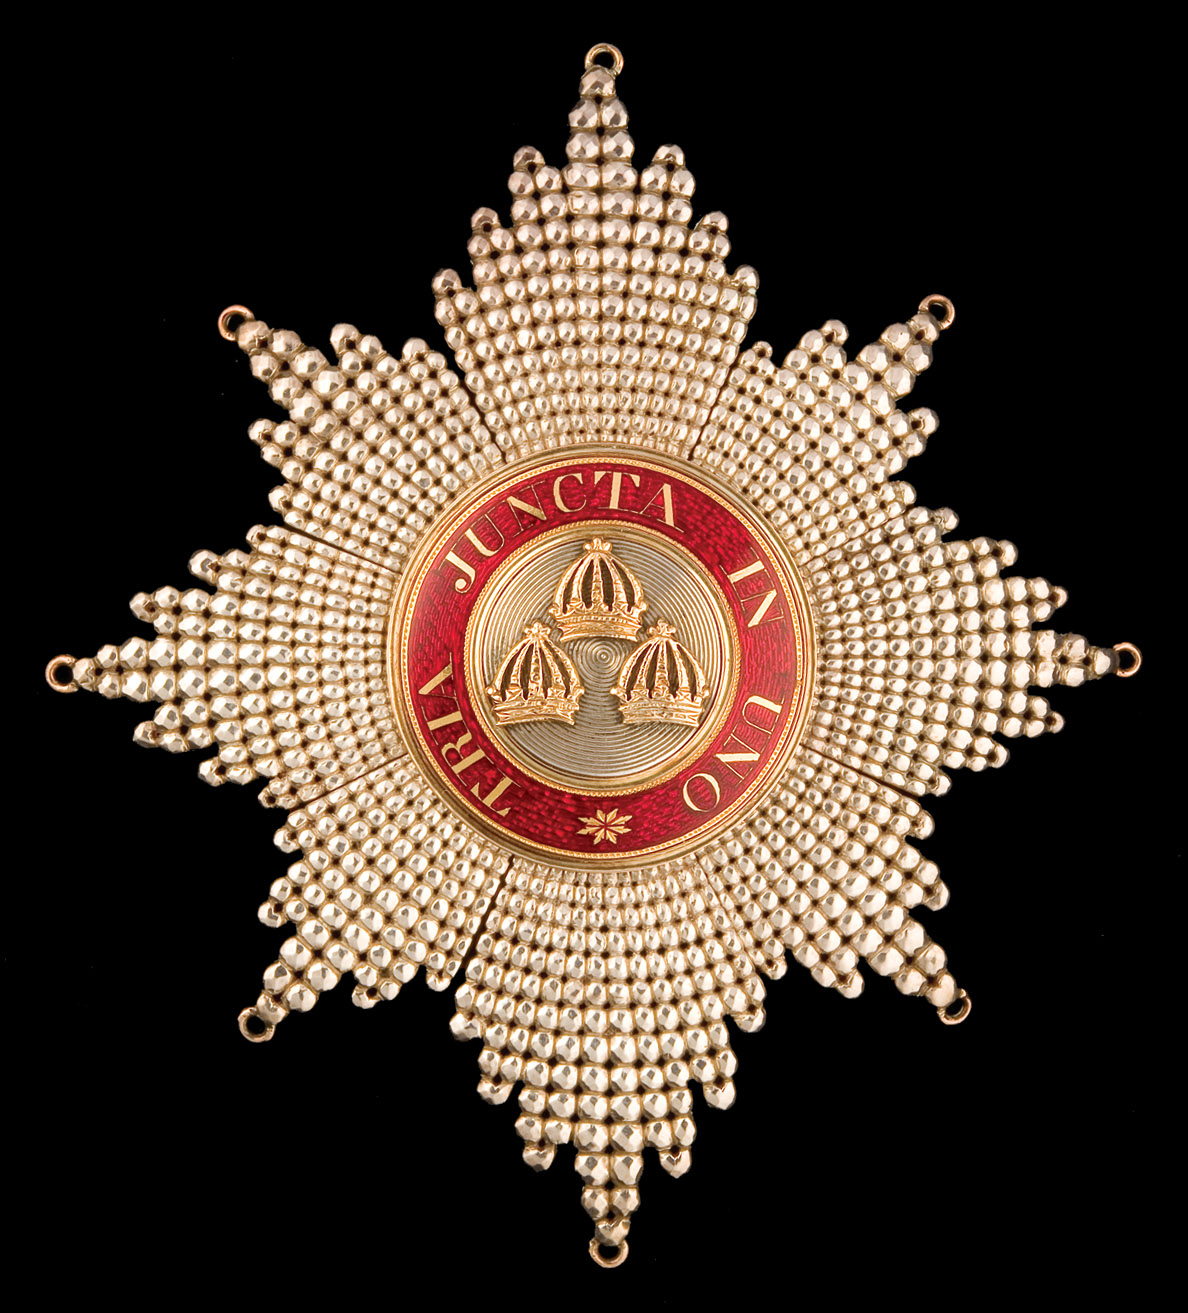 *The Most Honourable Order of the Bath, Knight Companion’s breast star (K.B.), in silver, gold and